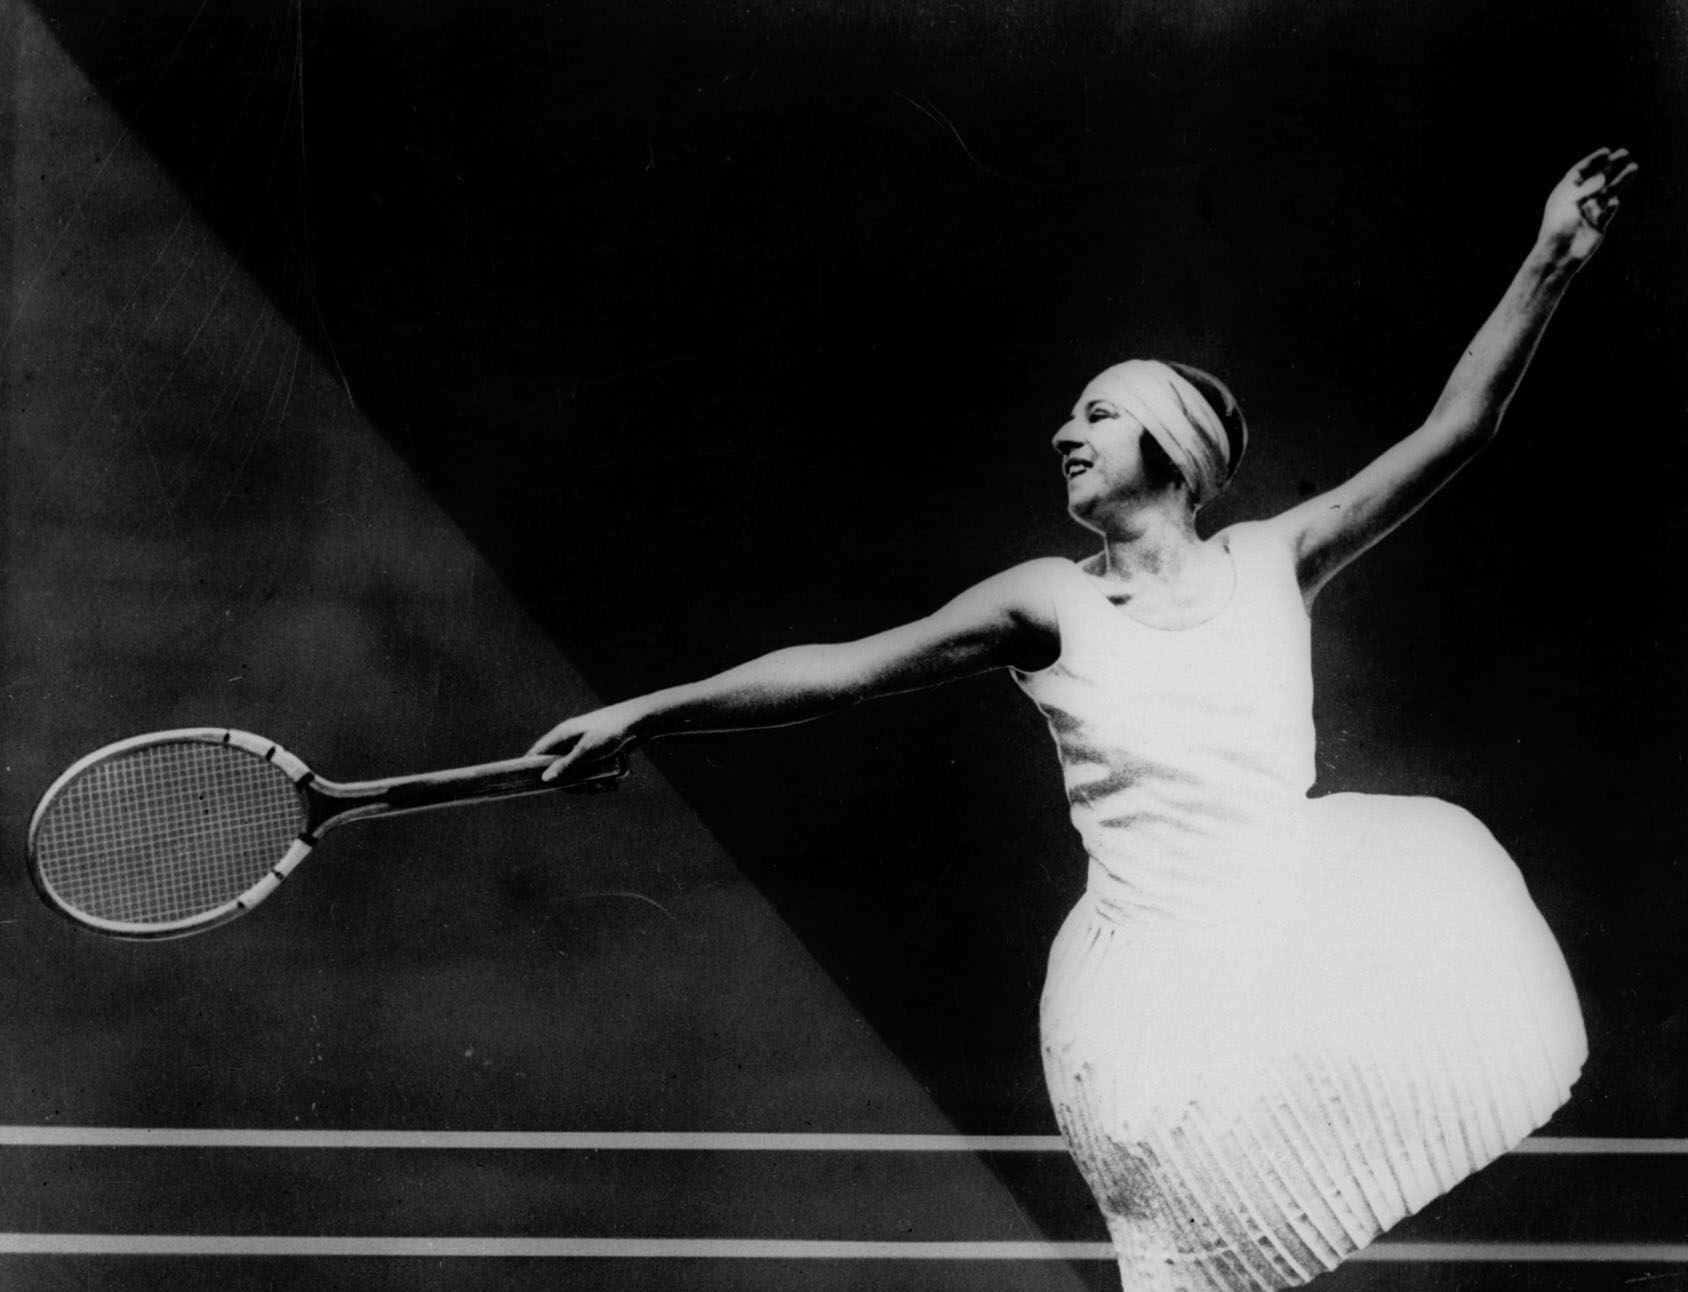 Caption: Iconic Suzanne Lenglen - The Star of Tennis = Wallpaper